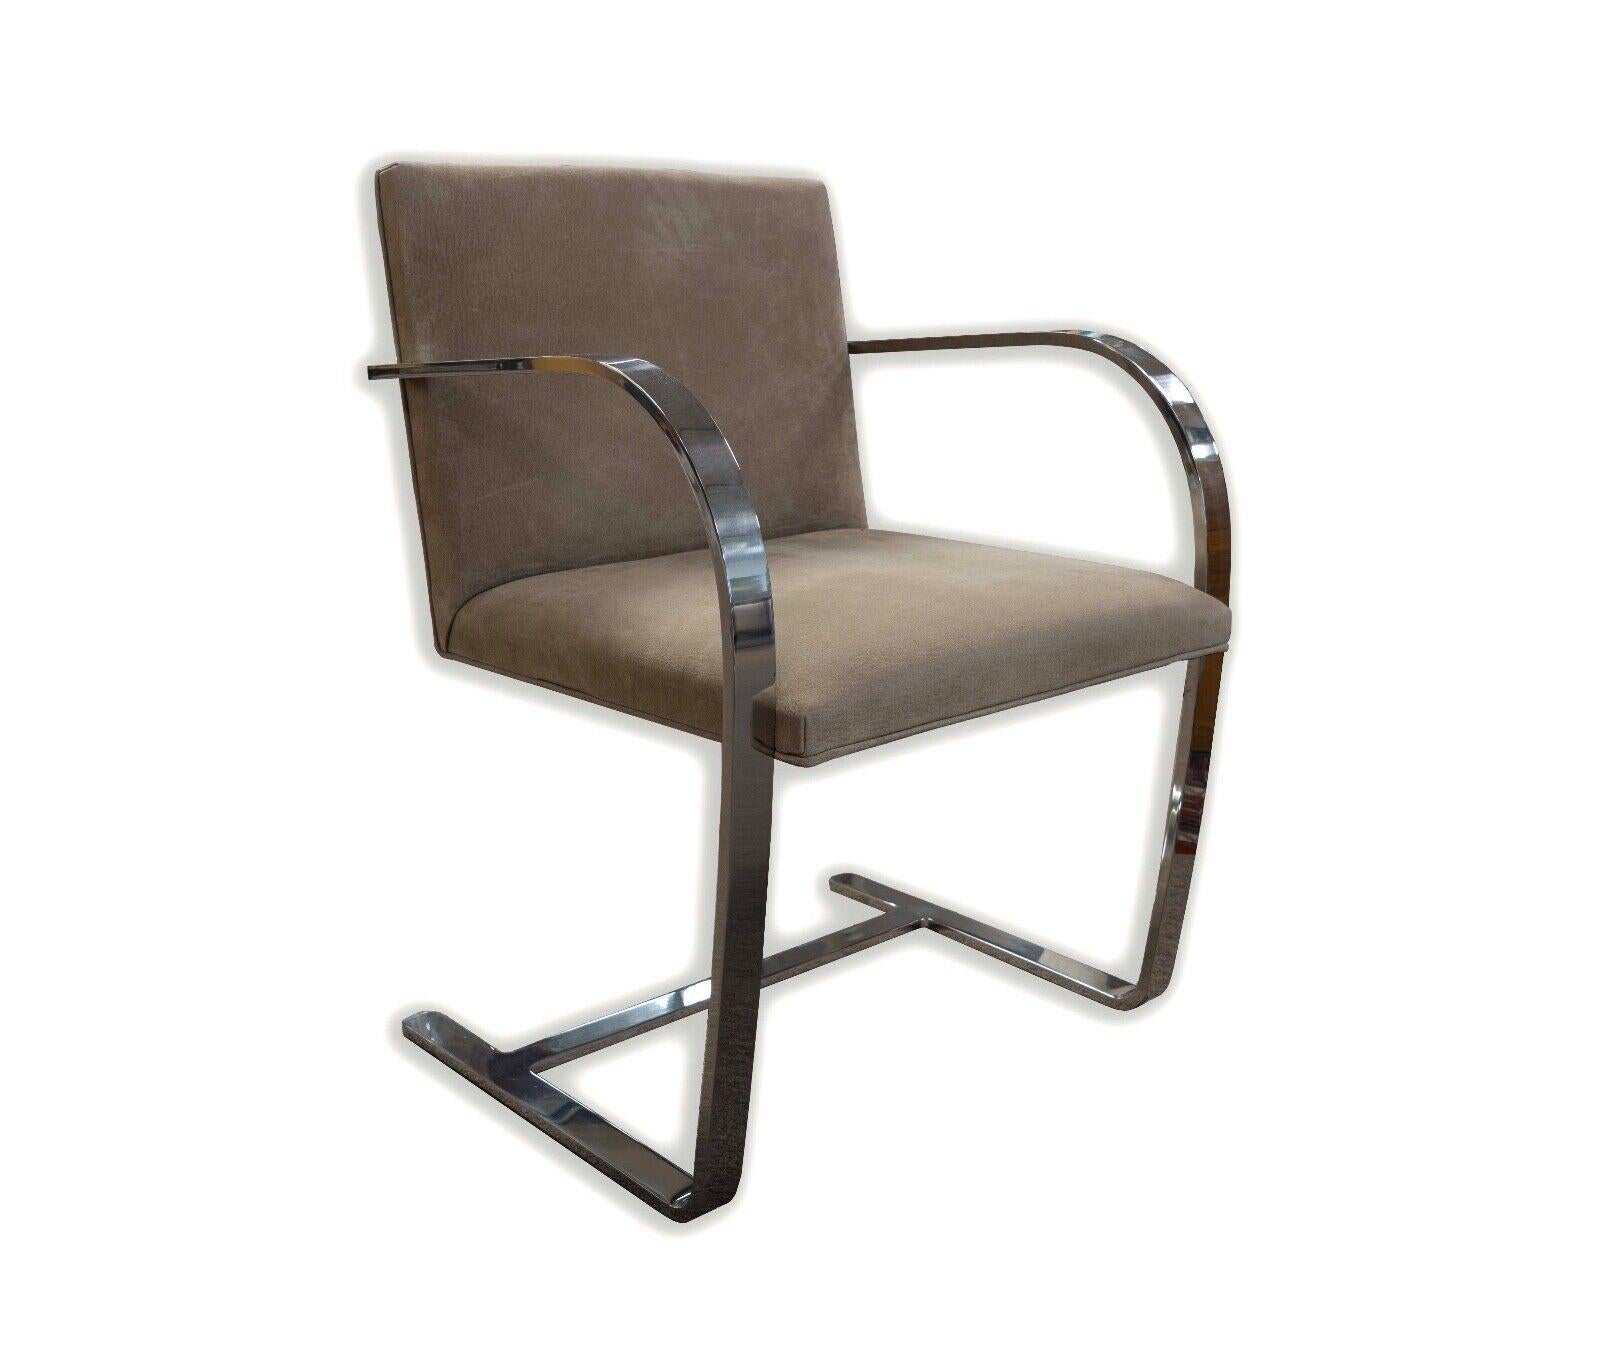 This set of six BRNO chairs by Mies Van Der Rohe epitomizes the sleek, minimalist aesthetic of mid-century modern design. Each chair features a lustrous chrome frame that creates an elegant contrast with the plush ultra suede upholstery, offering a